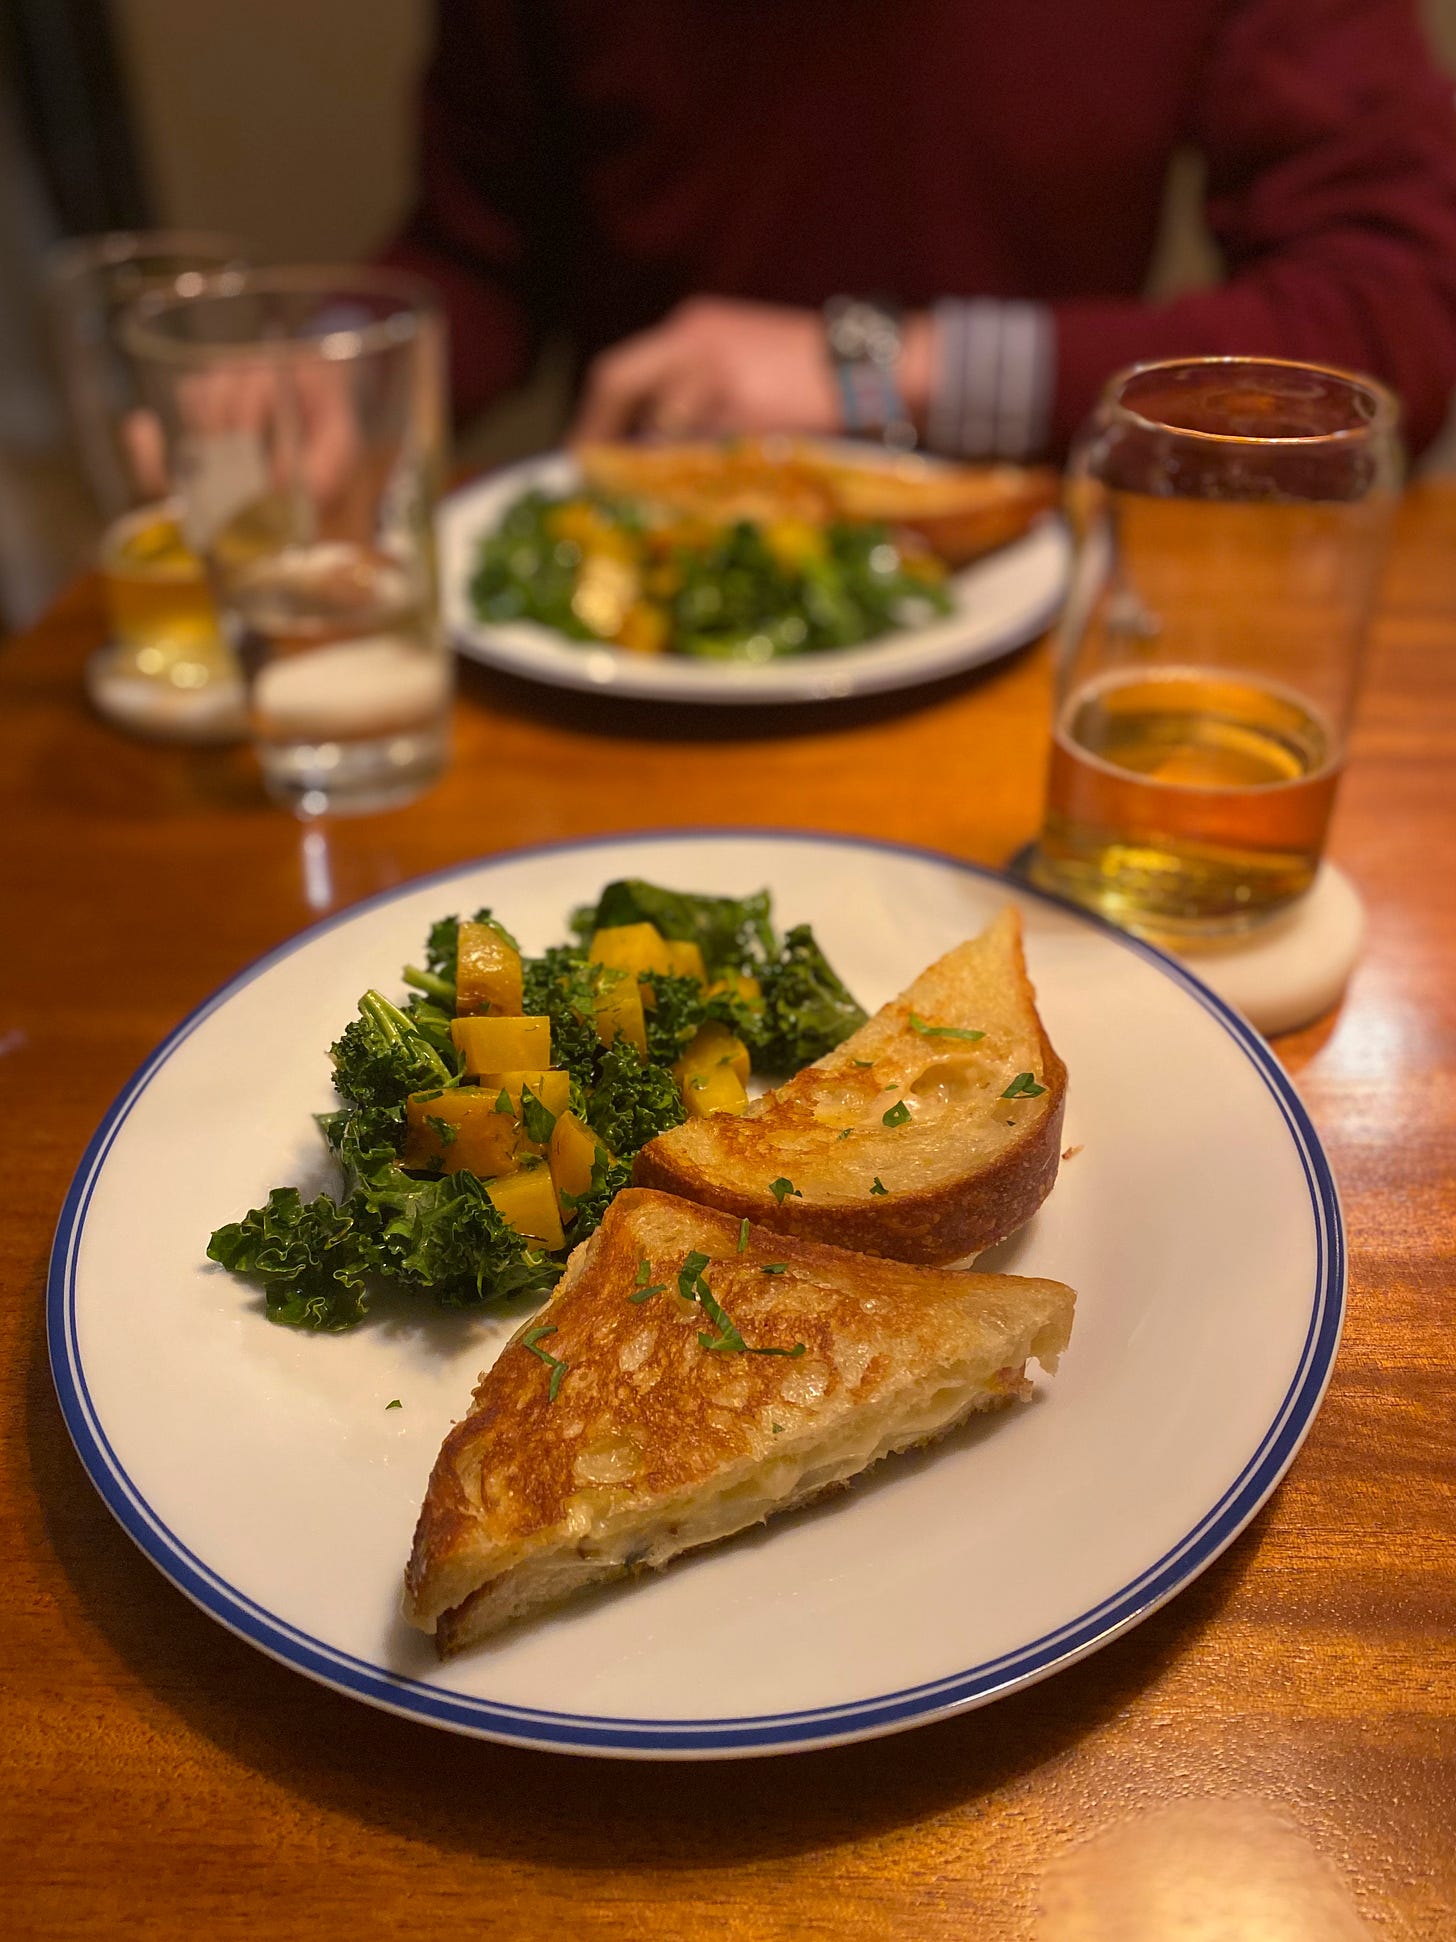 A halved grilled cheese sandwich with roasted fennel slices next to a kale and golden beet salad on a white plate with a blue rim. Next to it is a partially full glass of beer on a coaster. Jeff sits across the table, blurred in the background, the same meal in front of him.